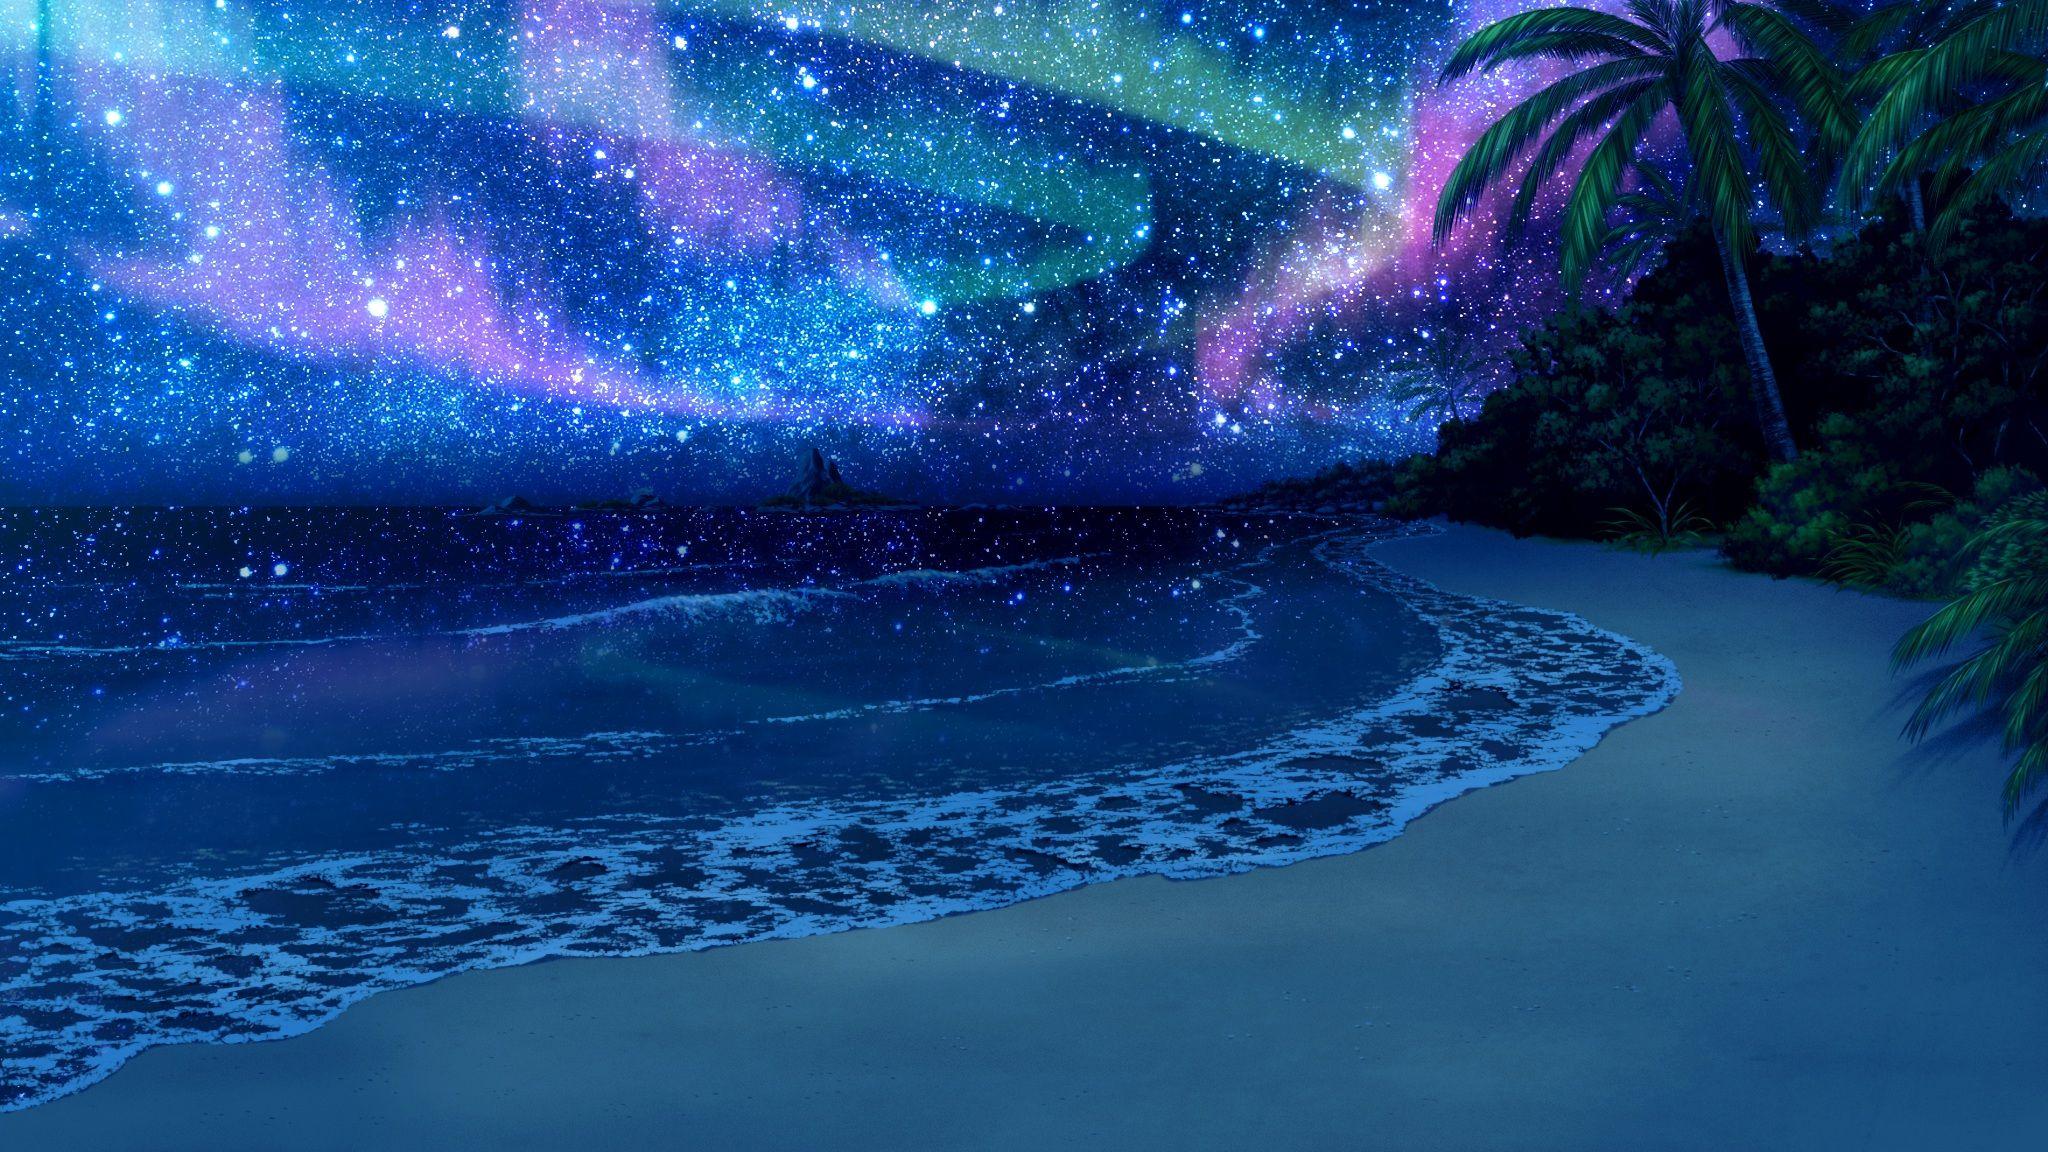 Beach At Night Wallpapers Top Free Beach At Night Backgrounds